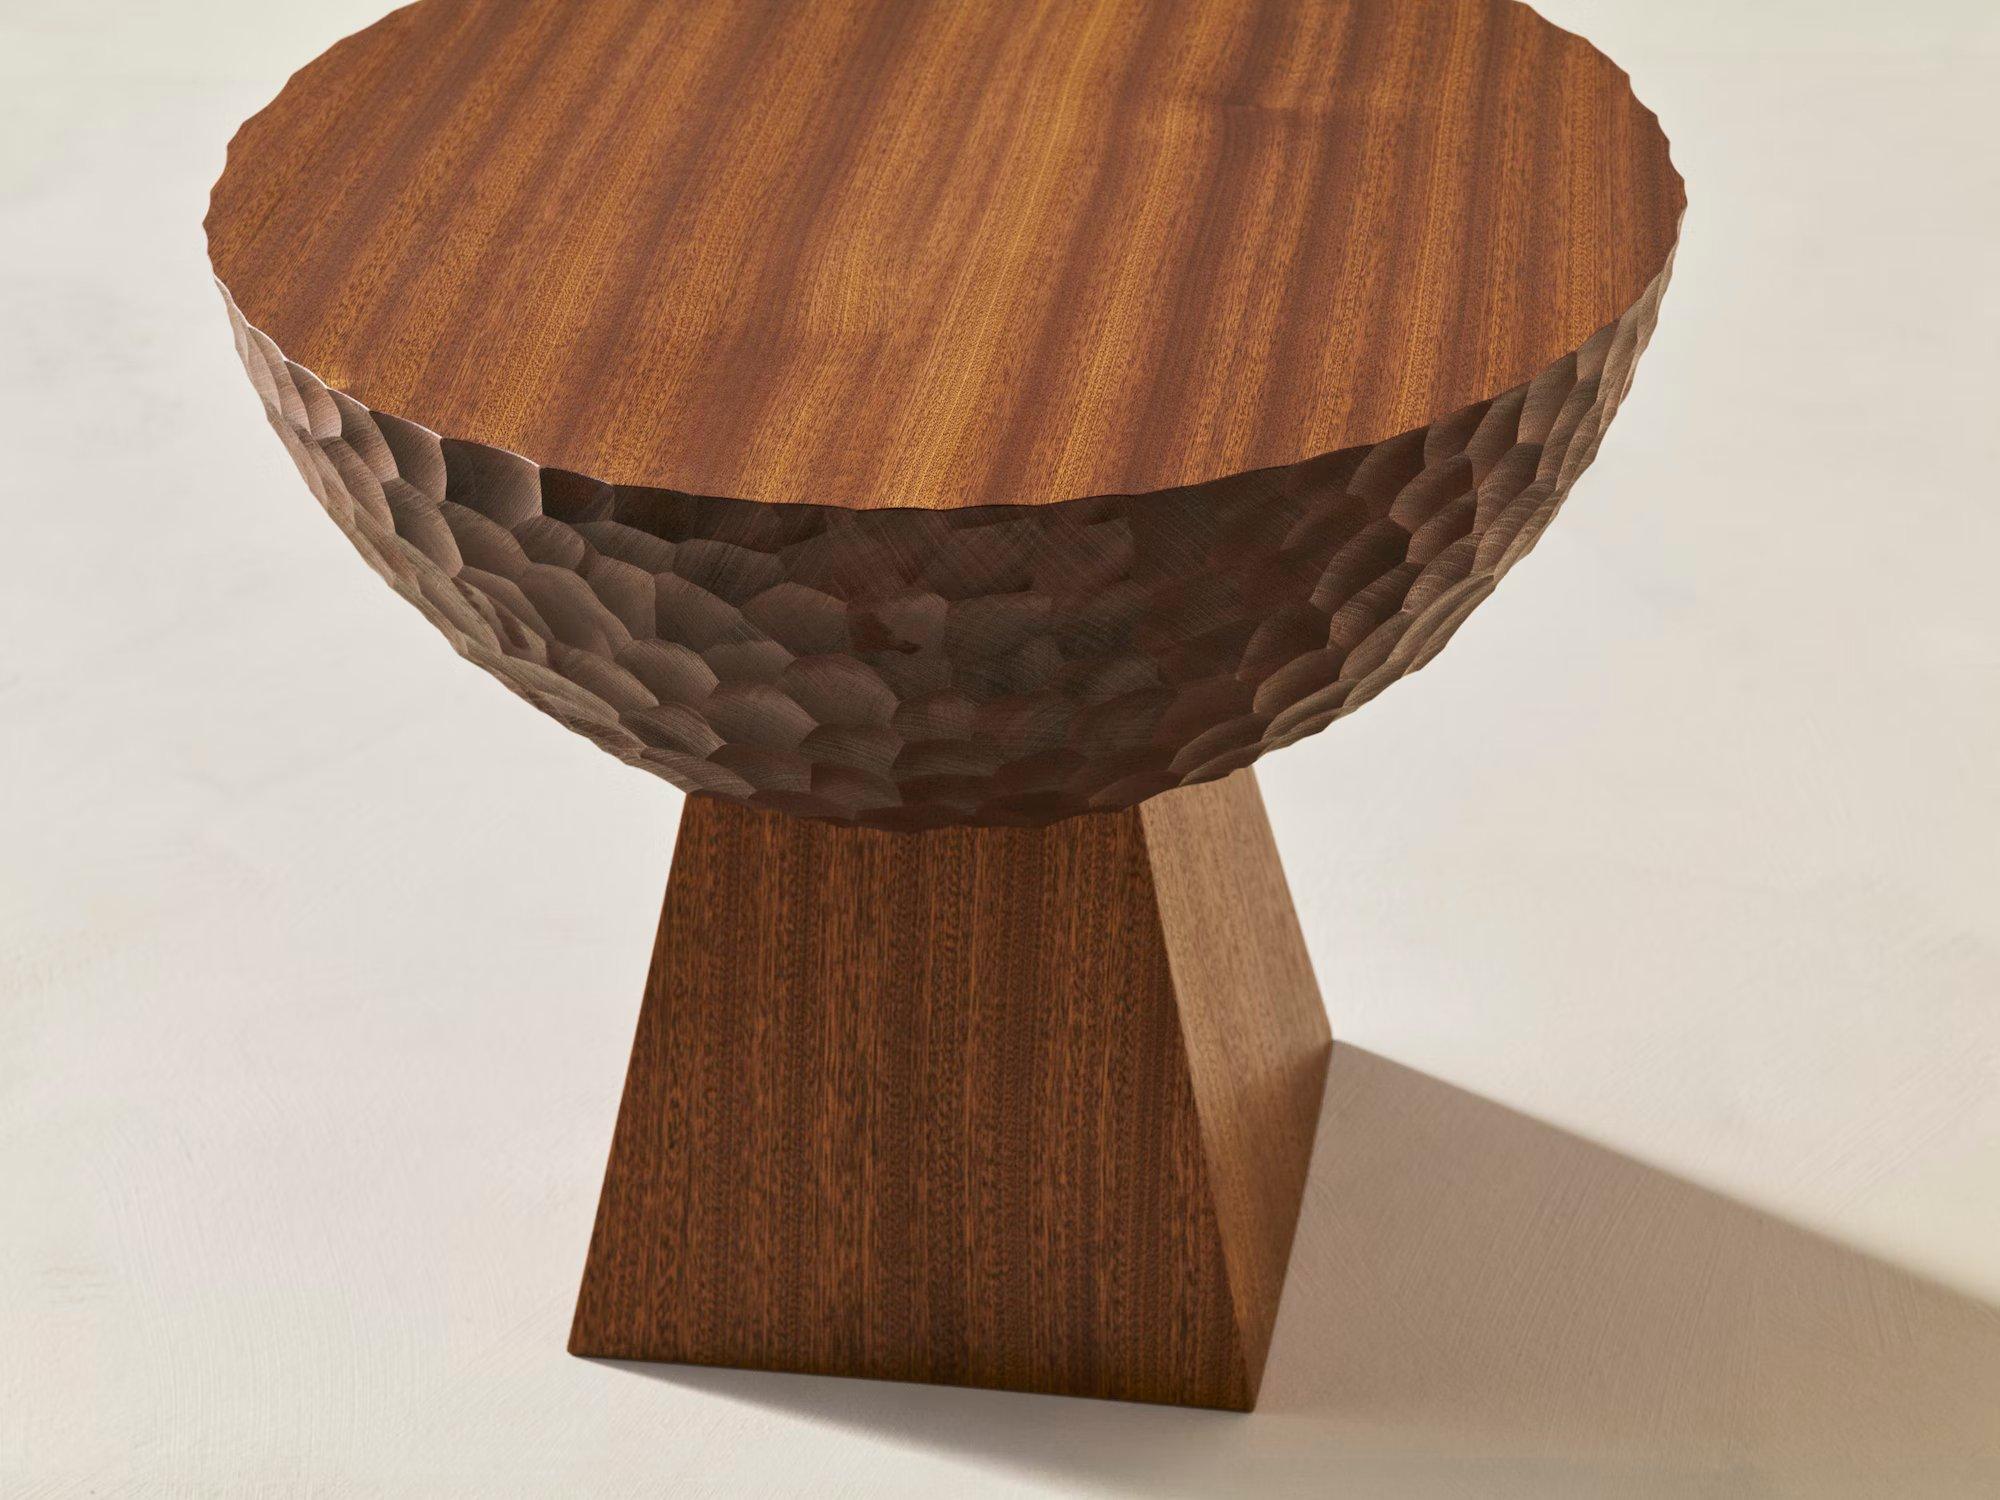 The charming smaller sibling of the SKL. Hand-carved from solid premium timber, the SKS (Small Key Star Side Table) is a sculptural showcase of classic craftsmanship. Precise angles and a silky-smooth top contrast with the intricate hand carving,